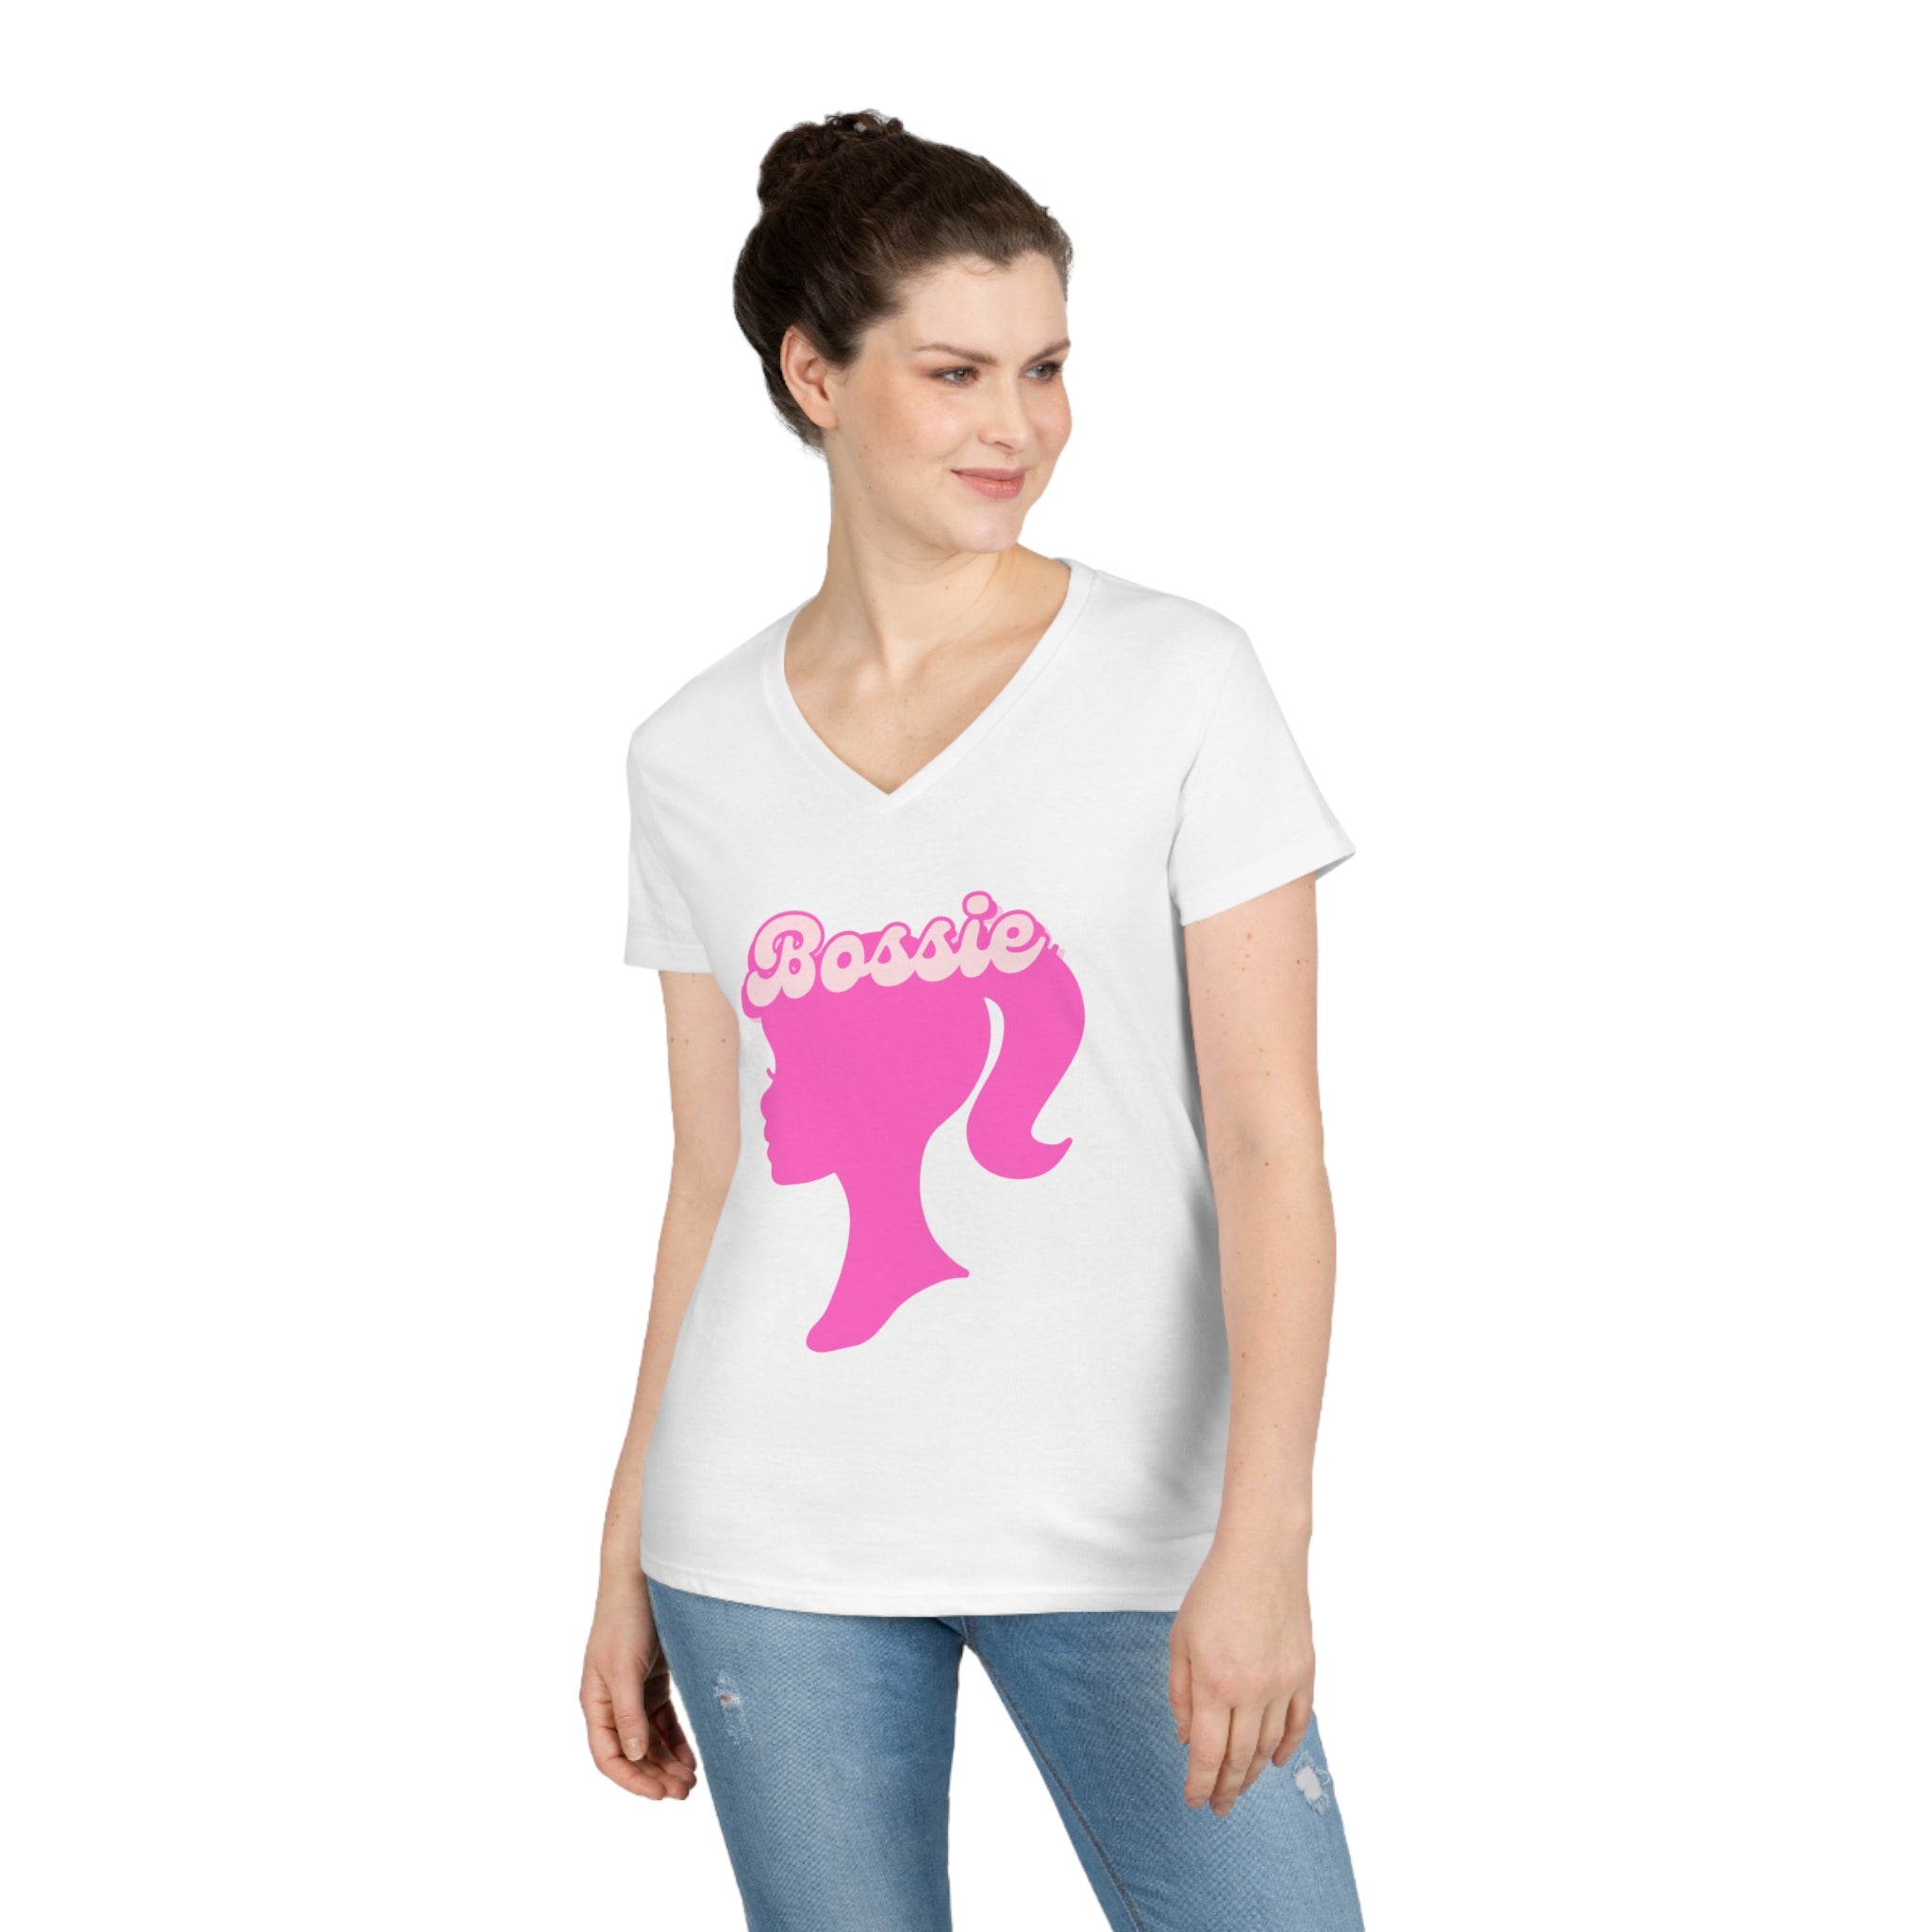 Bossie (Barbie Image) Funny Women's V Neck T-shirt, Cute Graphic Tee